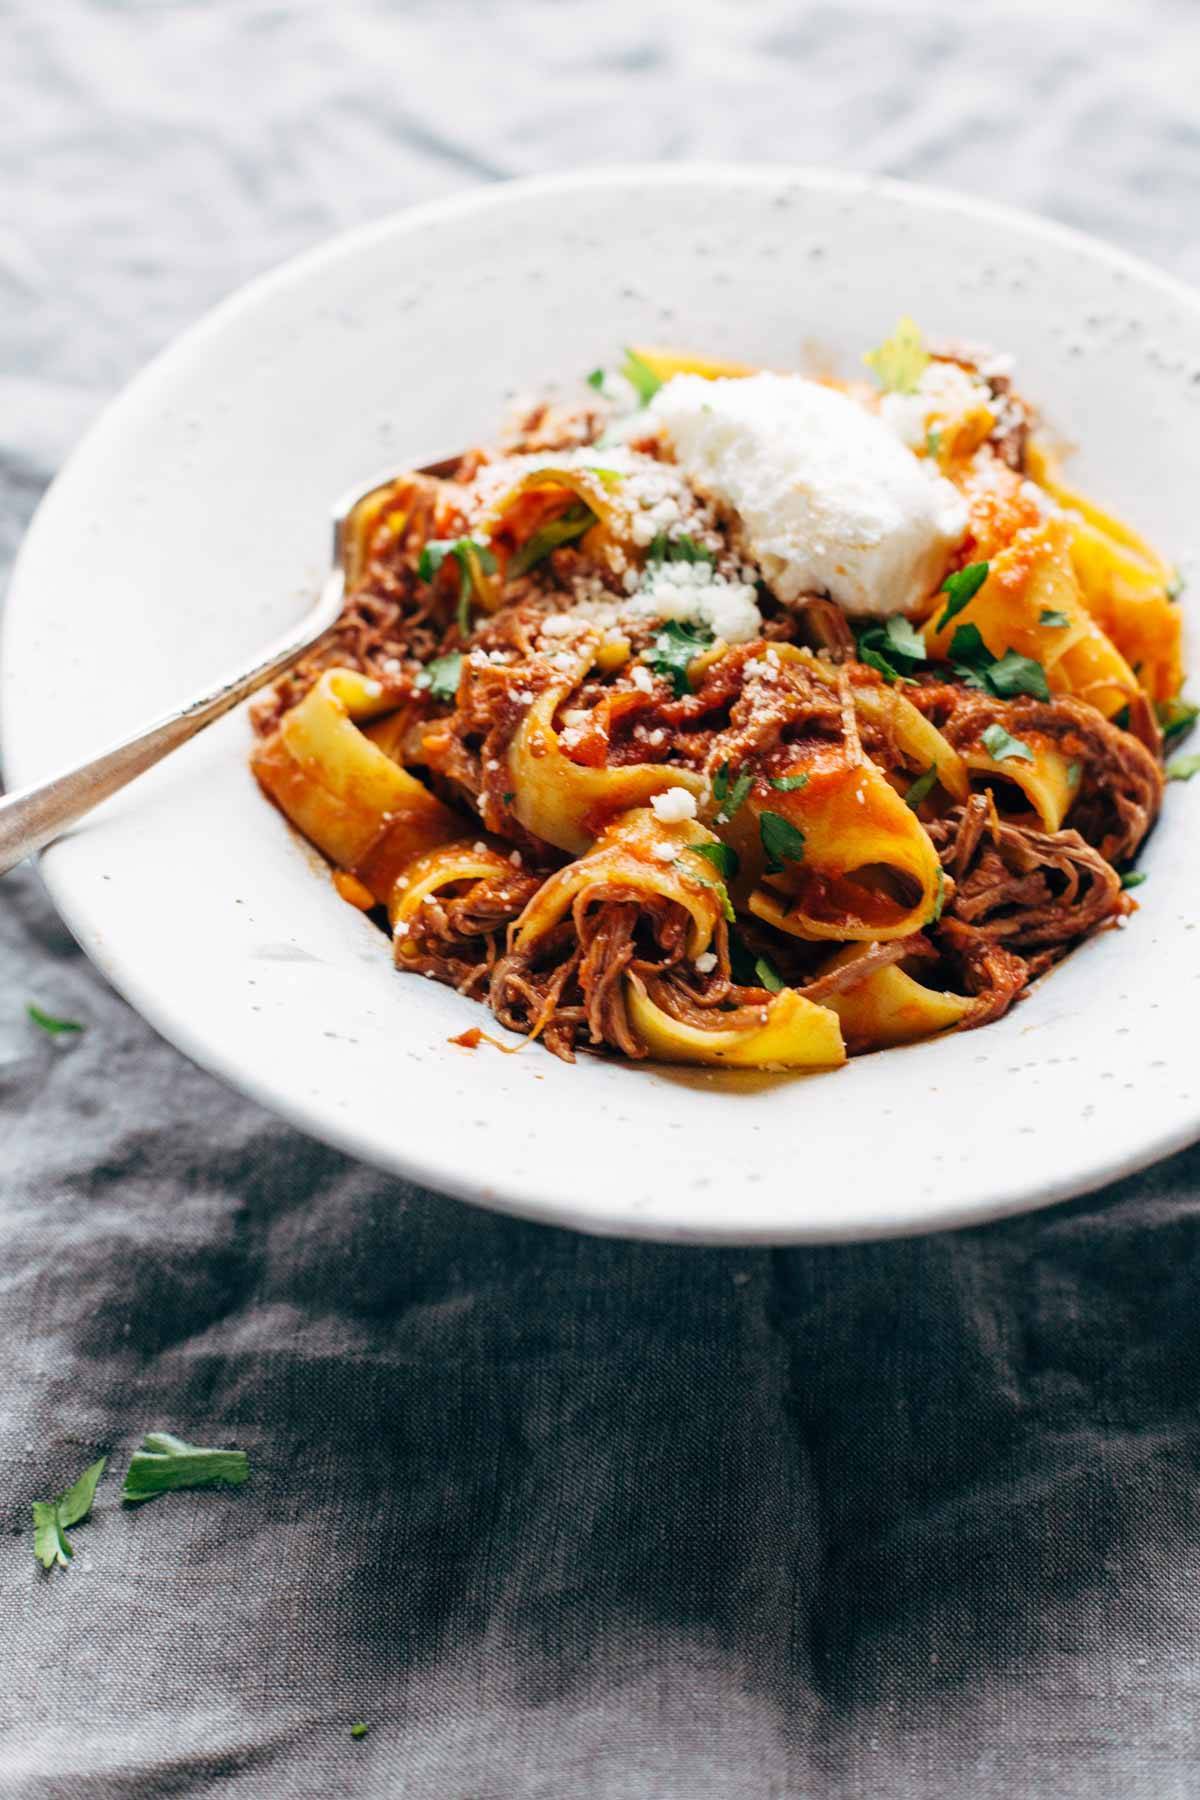 Slow Cooker Beef Ragu with Pappardelle - easy comfort food from the new Skinnytaste cookbook! | pinchofyum.com